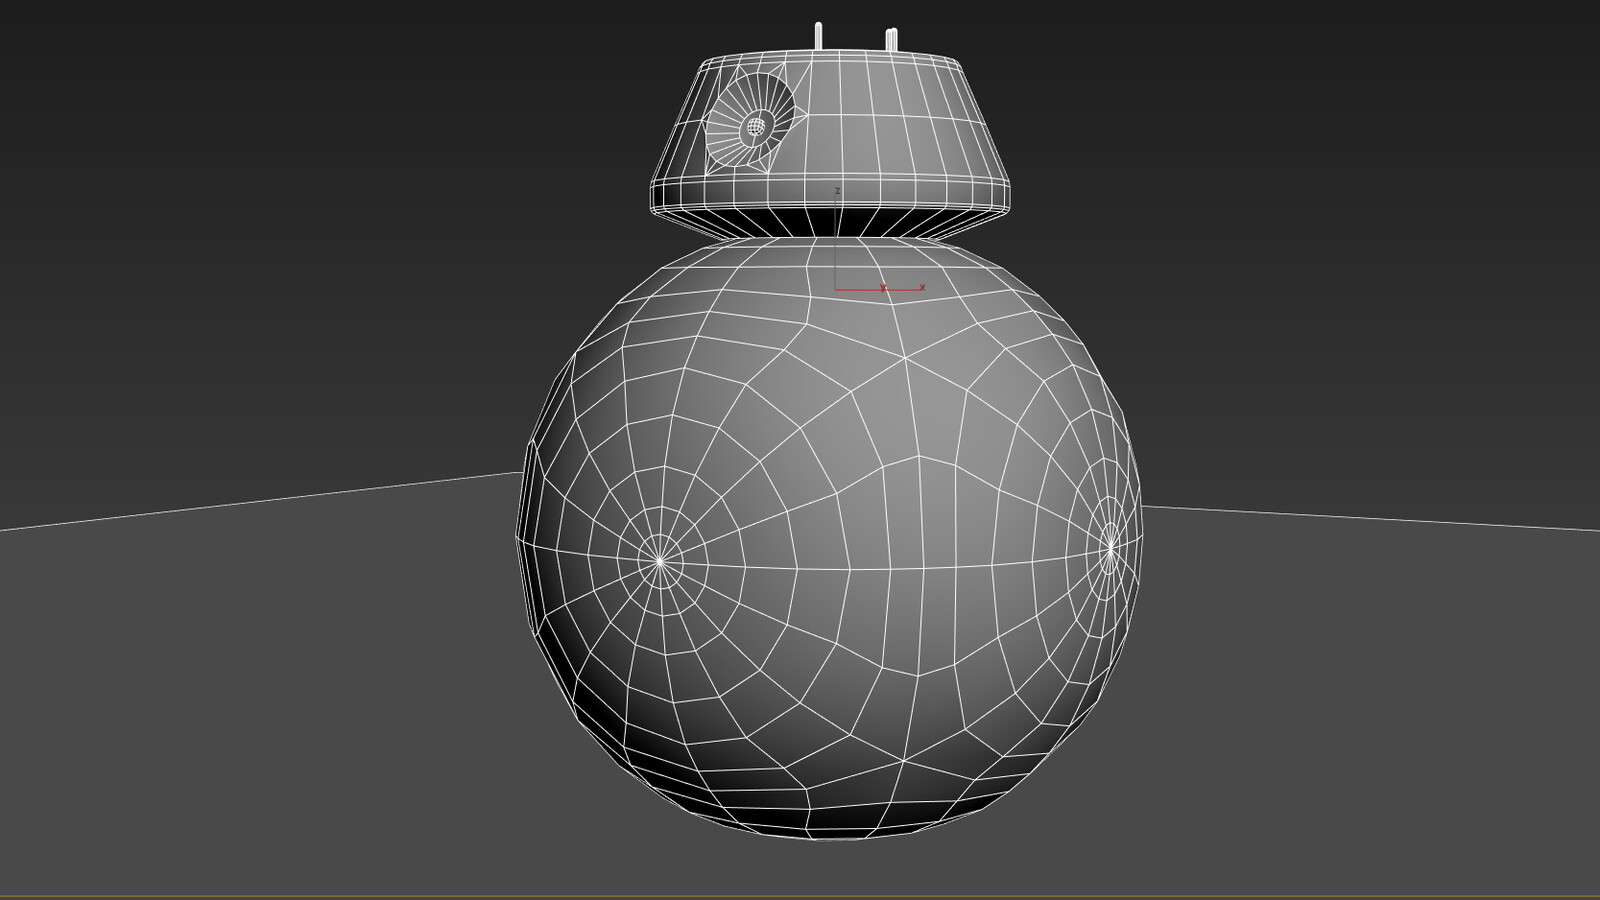 Wireframe of the low poly model. Polycount was 1675.